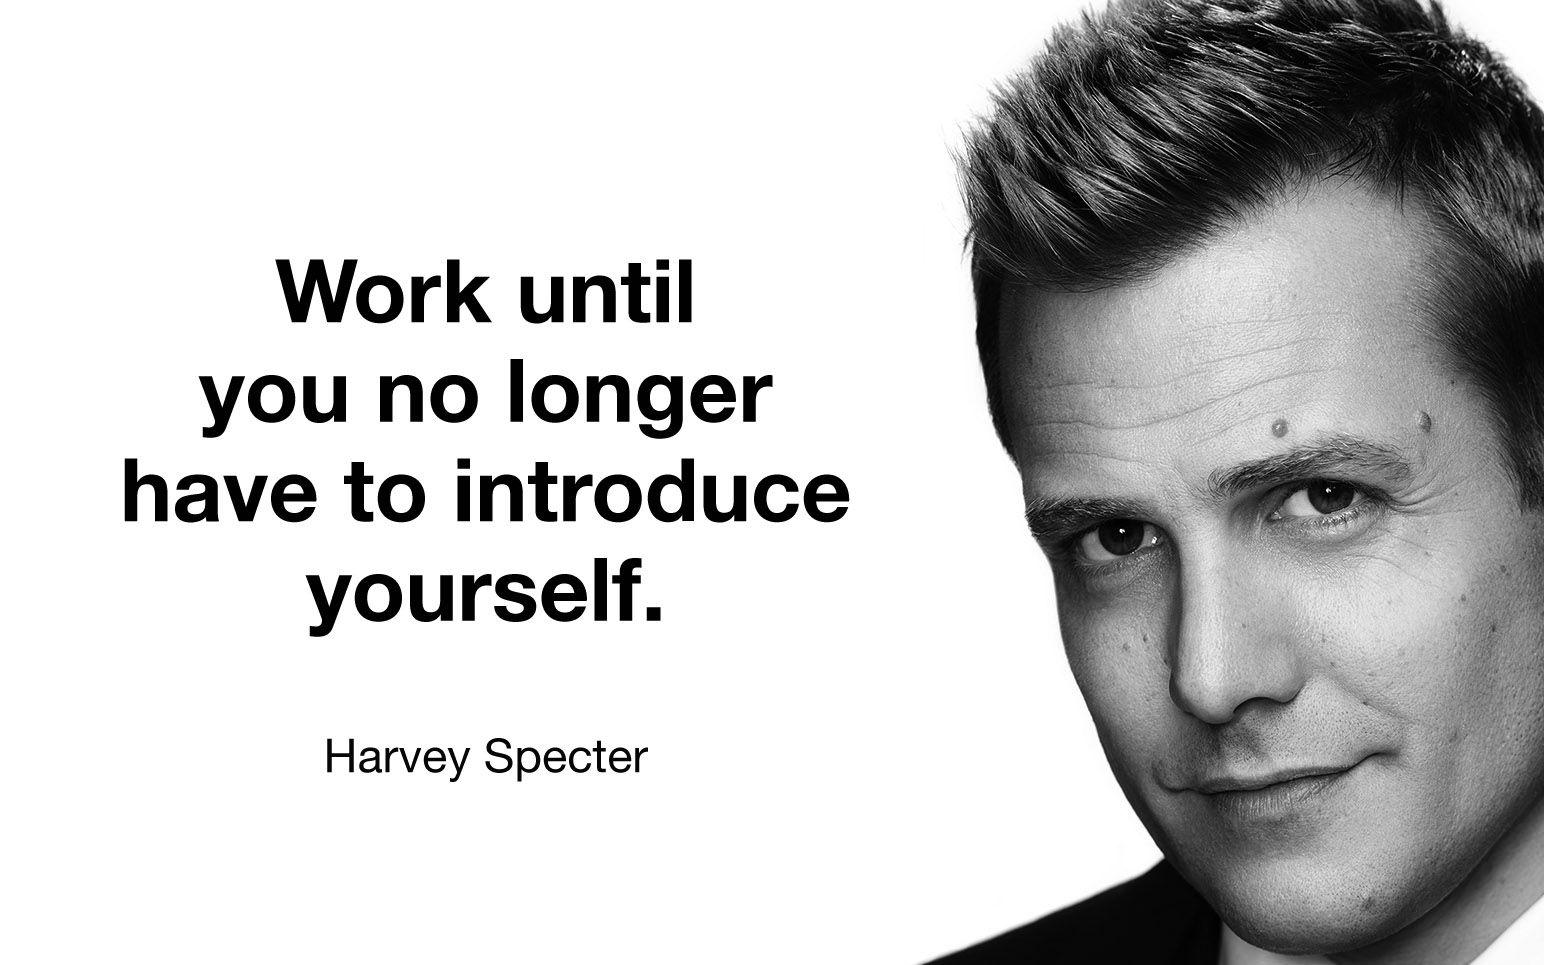 Harvey Specter quotes to help you win